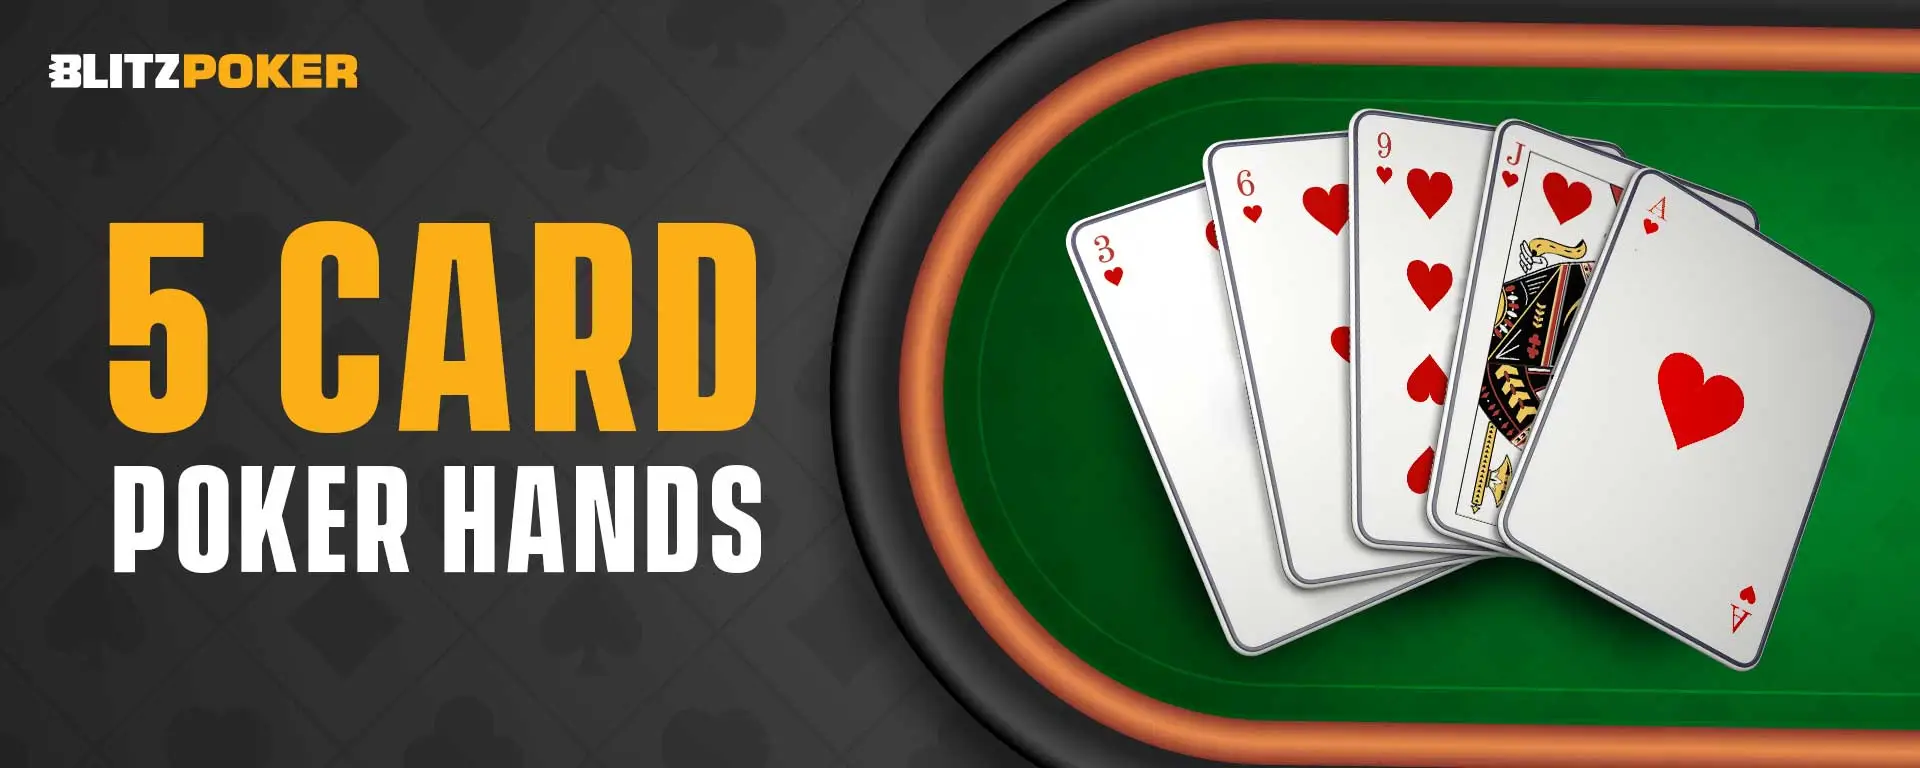 5 Card Poker Hands: Rules and Strategy